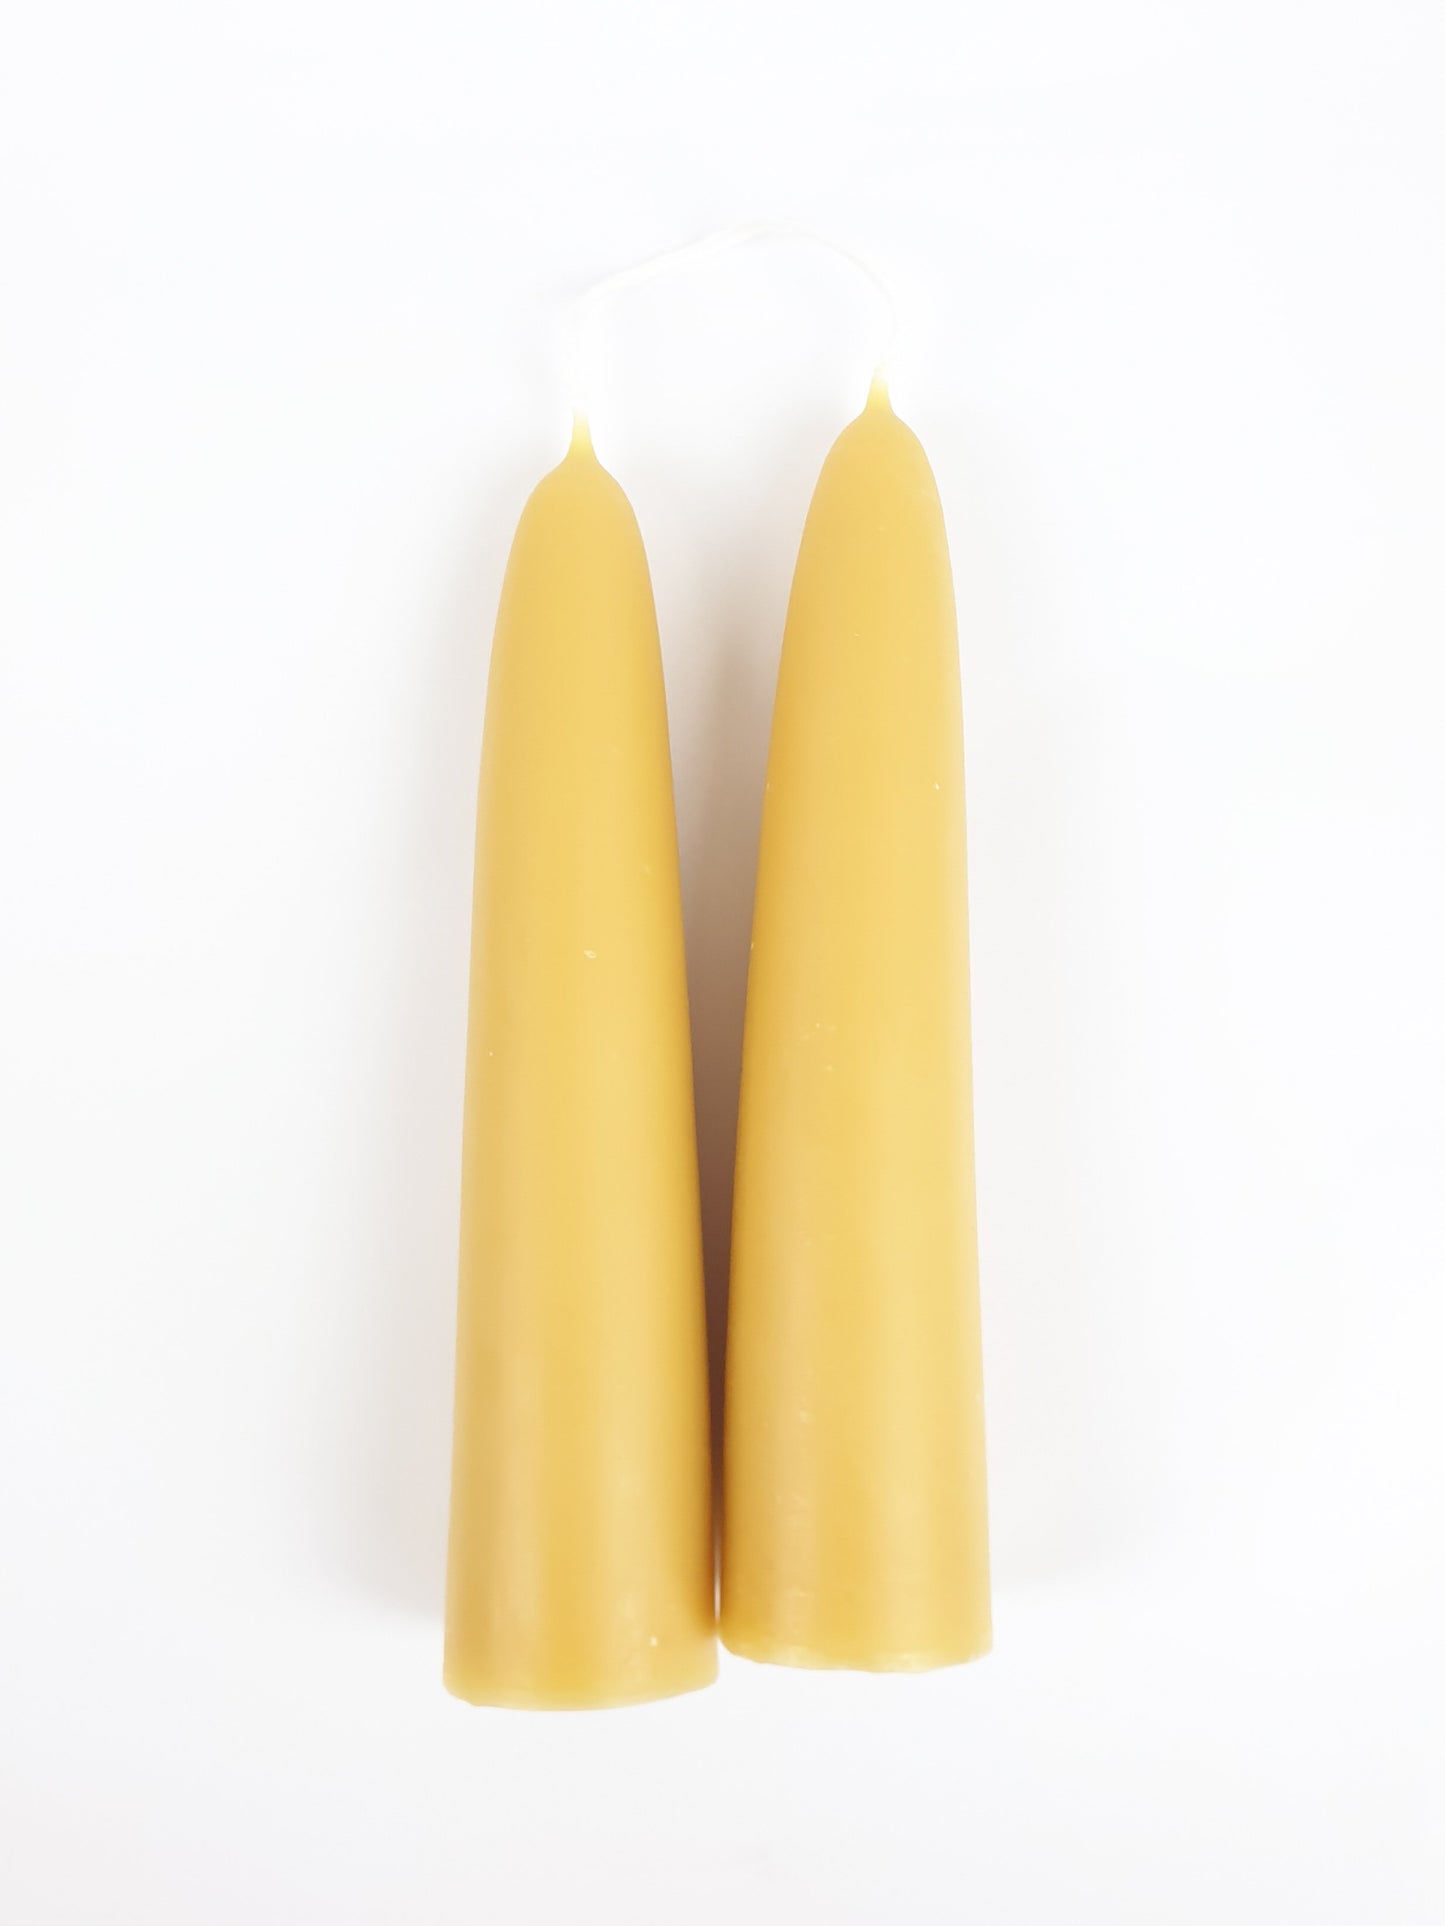 Giant Stubby English Beeswax Candles